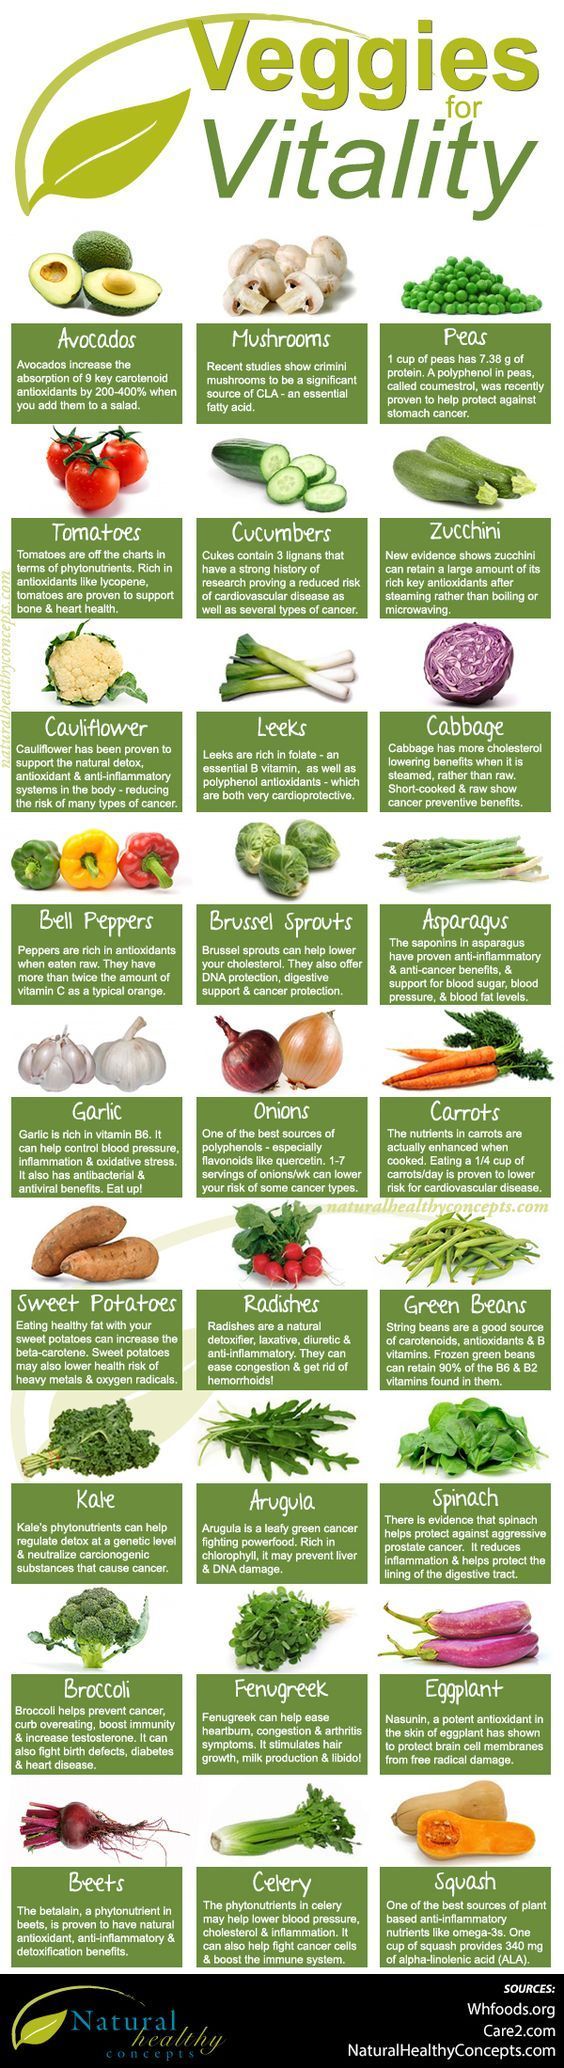 Veggies-for-Vitality – Natural Healthy Concepts